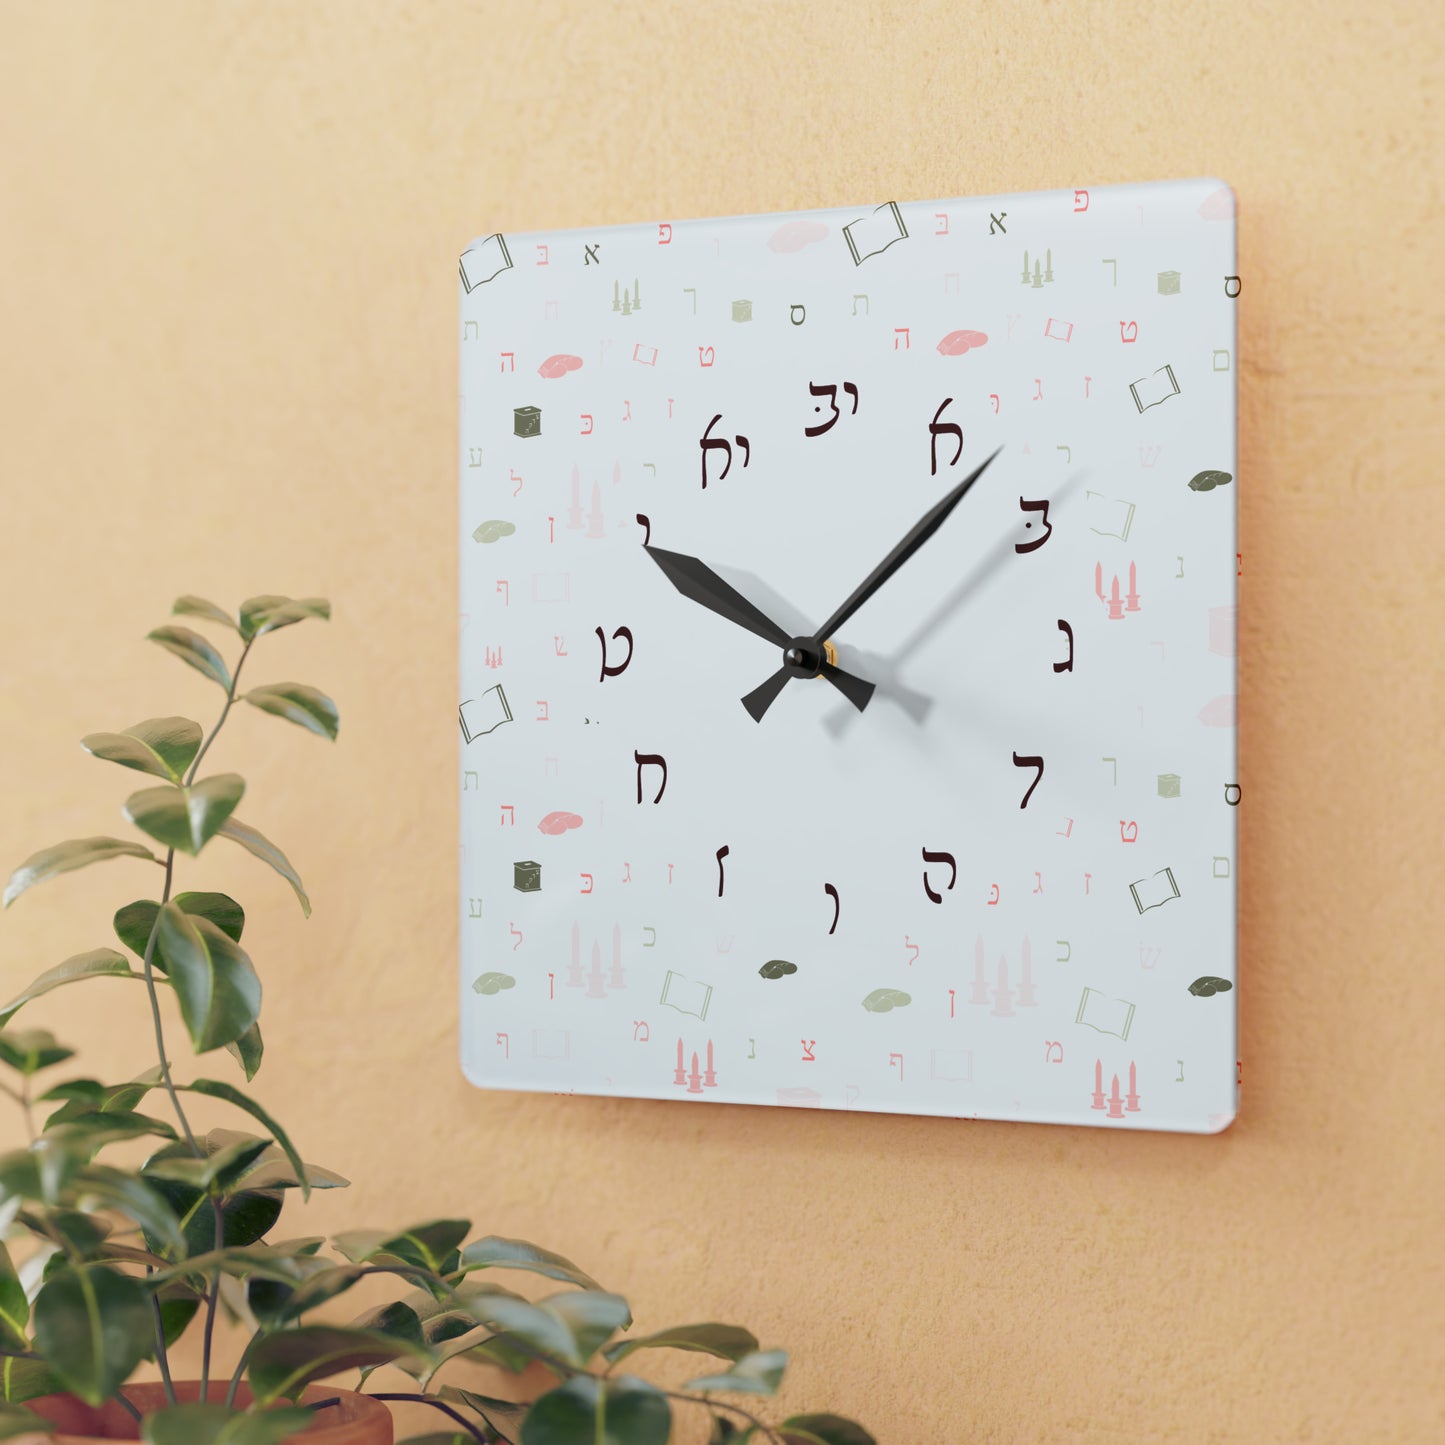 With Rashi Numbers - Mitzvah Girl Aleph Beis Acrylic Wall Clock